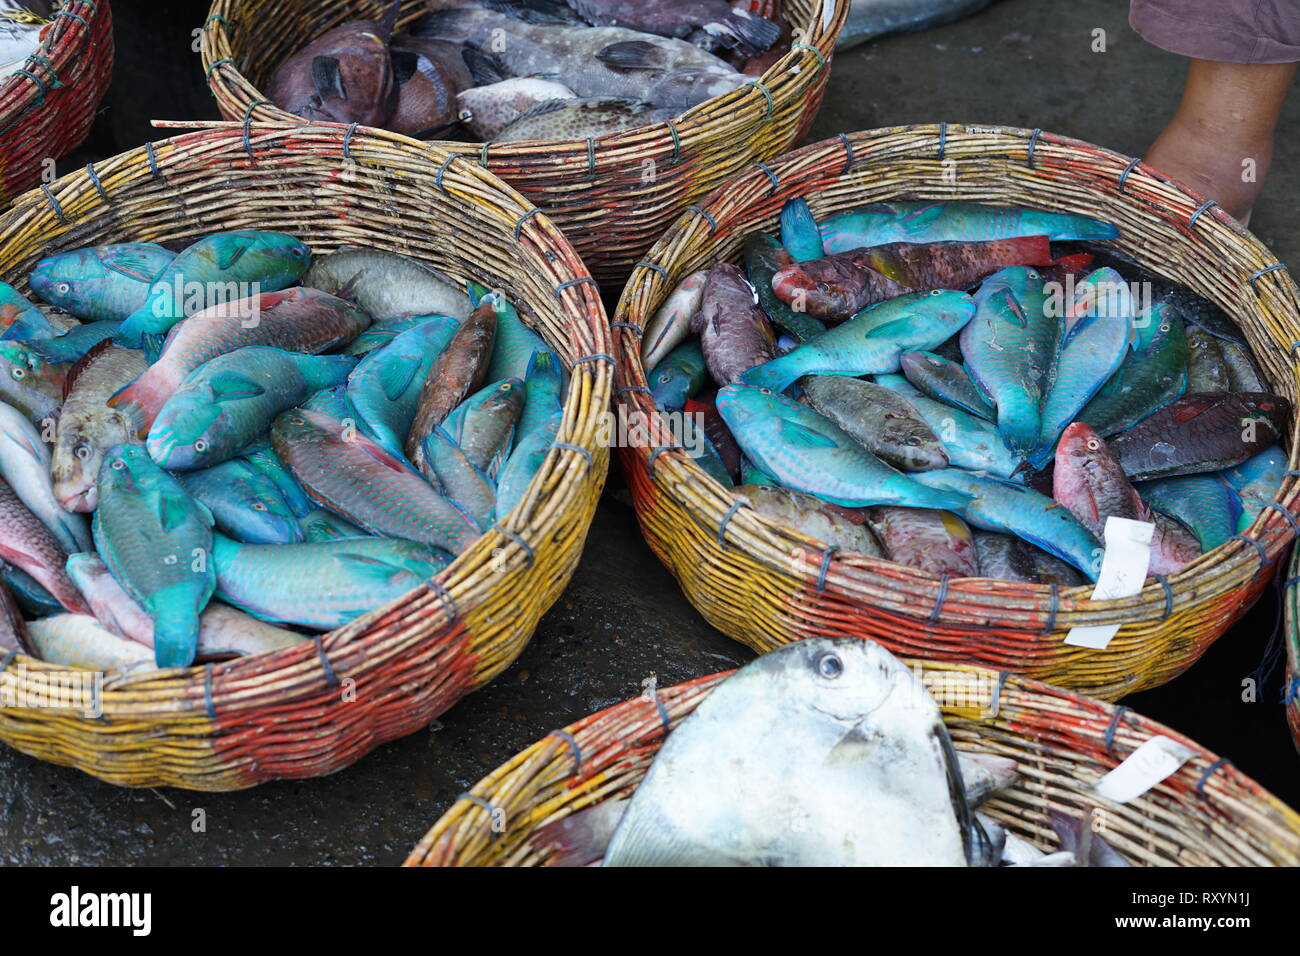 Fresh parrot fish in a wicker basket for sale at seafood market Stock Photo